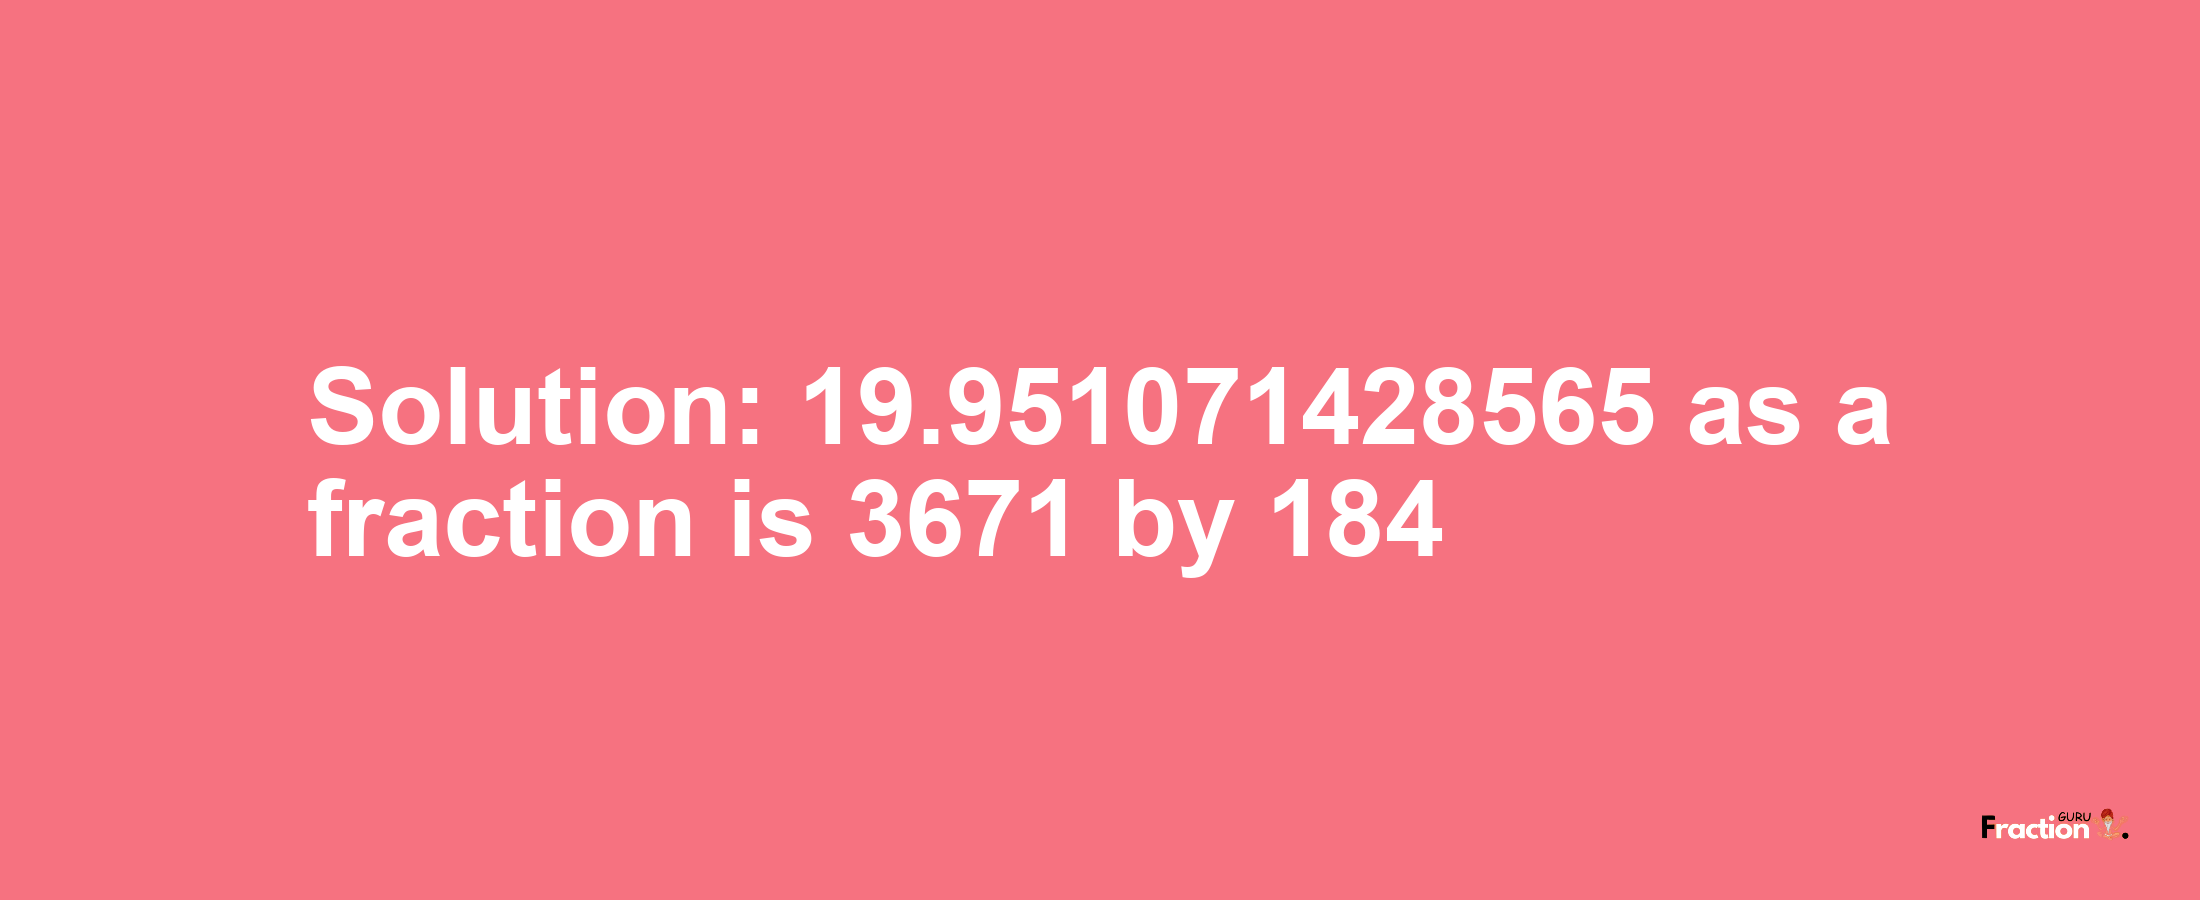 Solution:19.951071428565 as a fraction is 3671/184